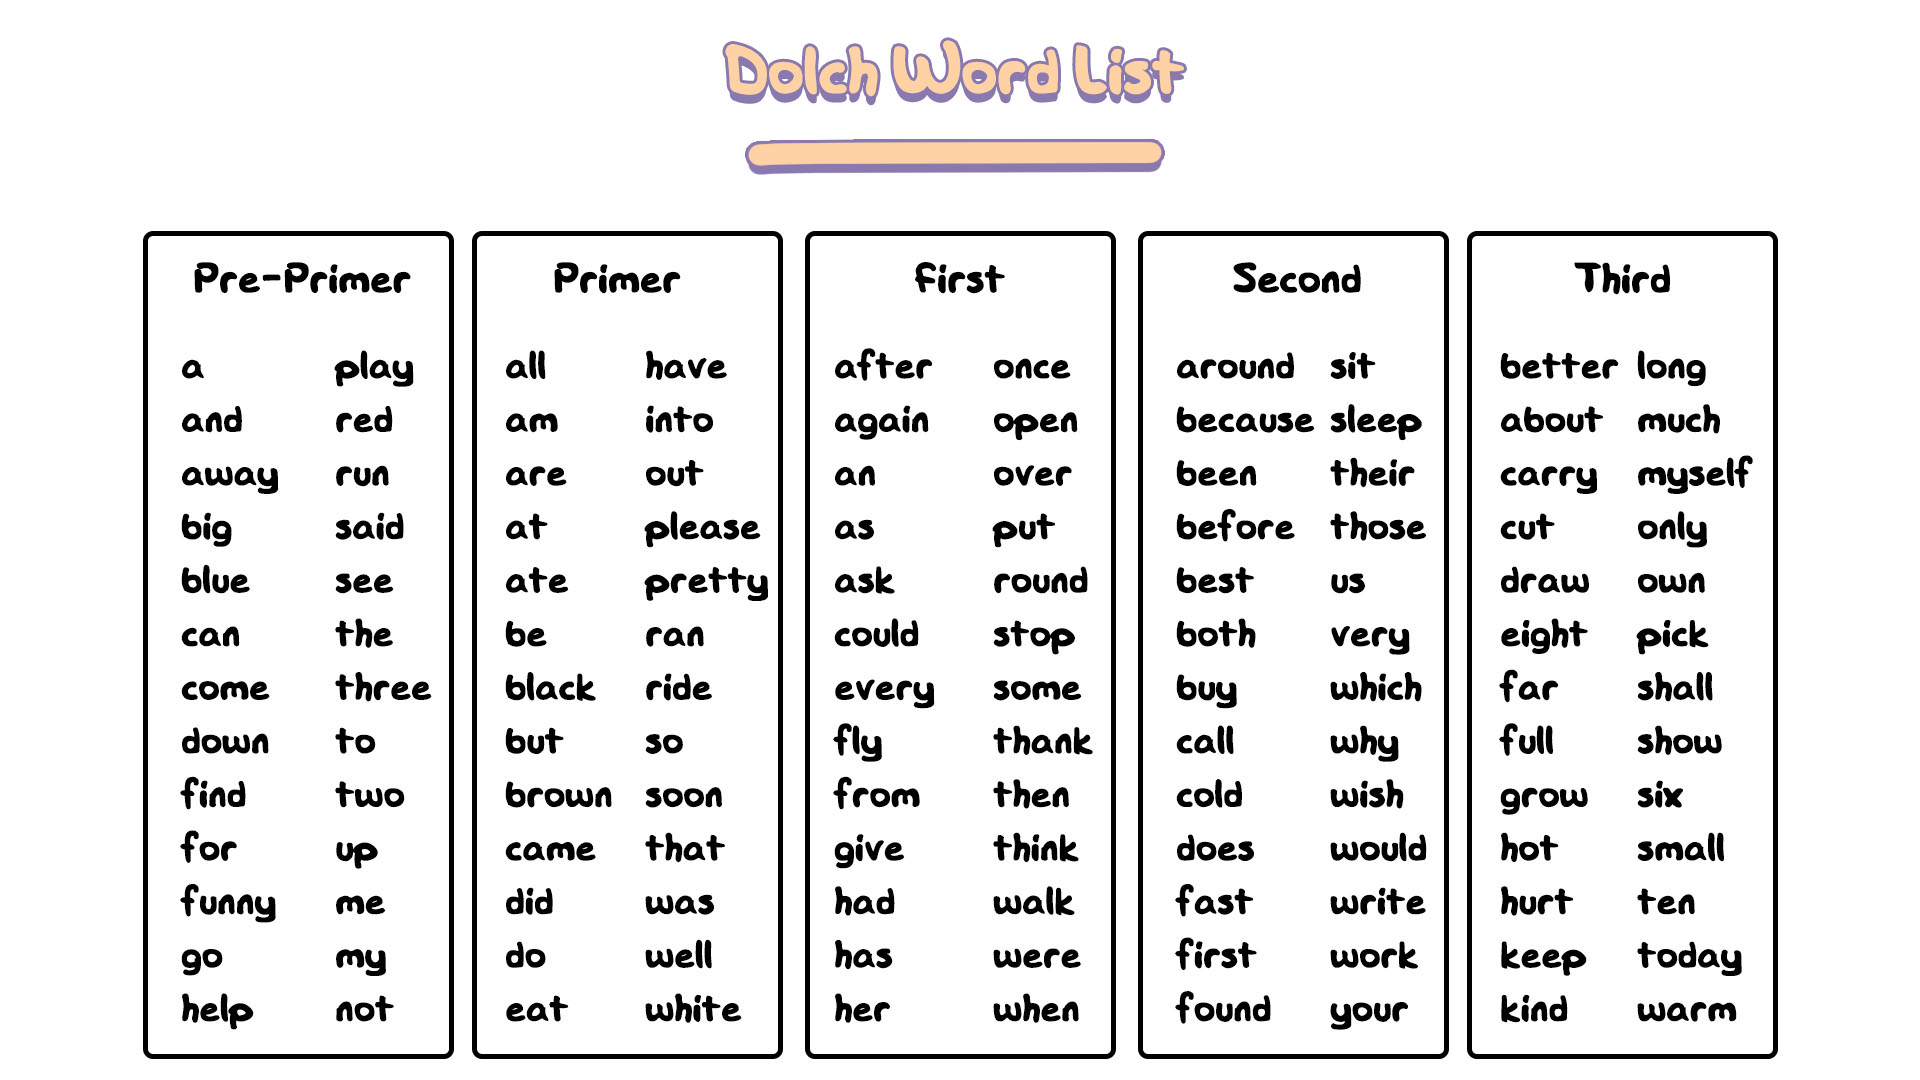 5th Grade Dolch Sight Word List